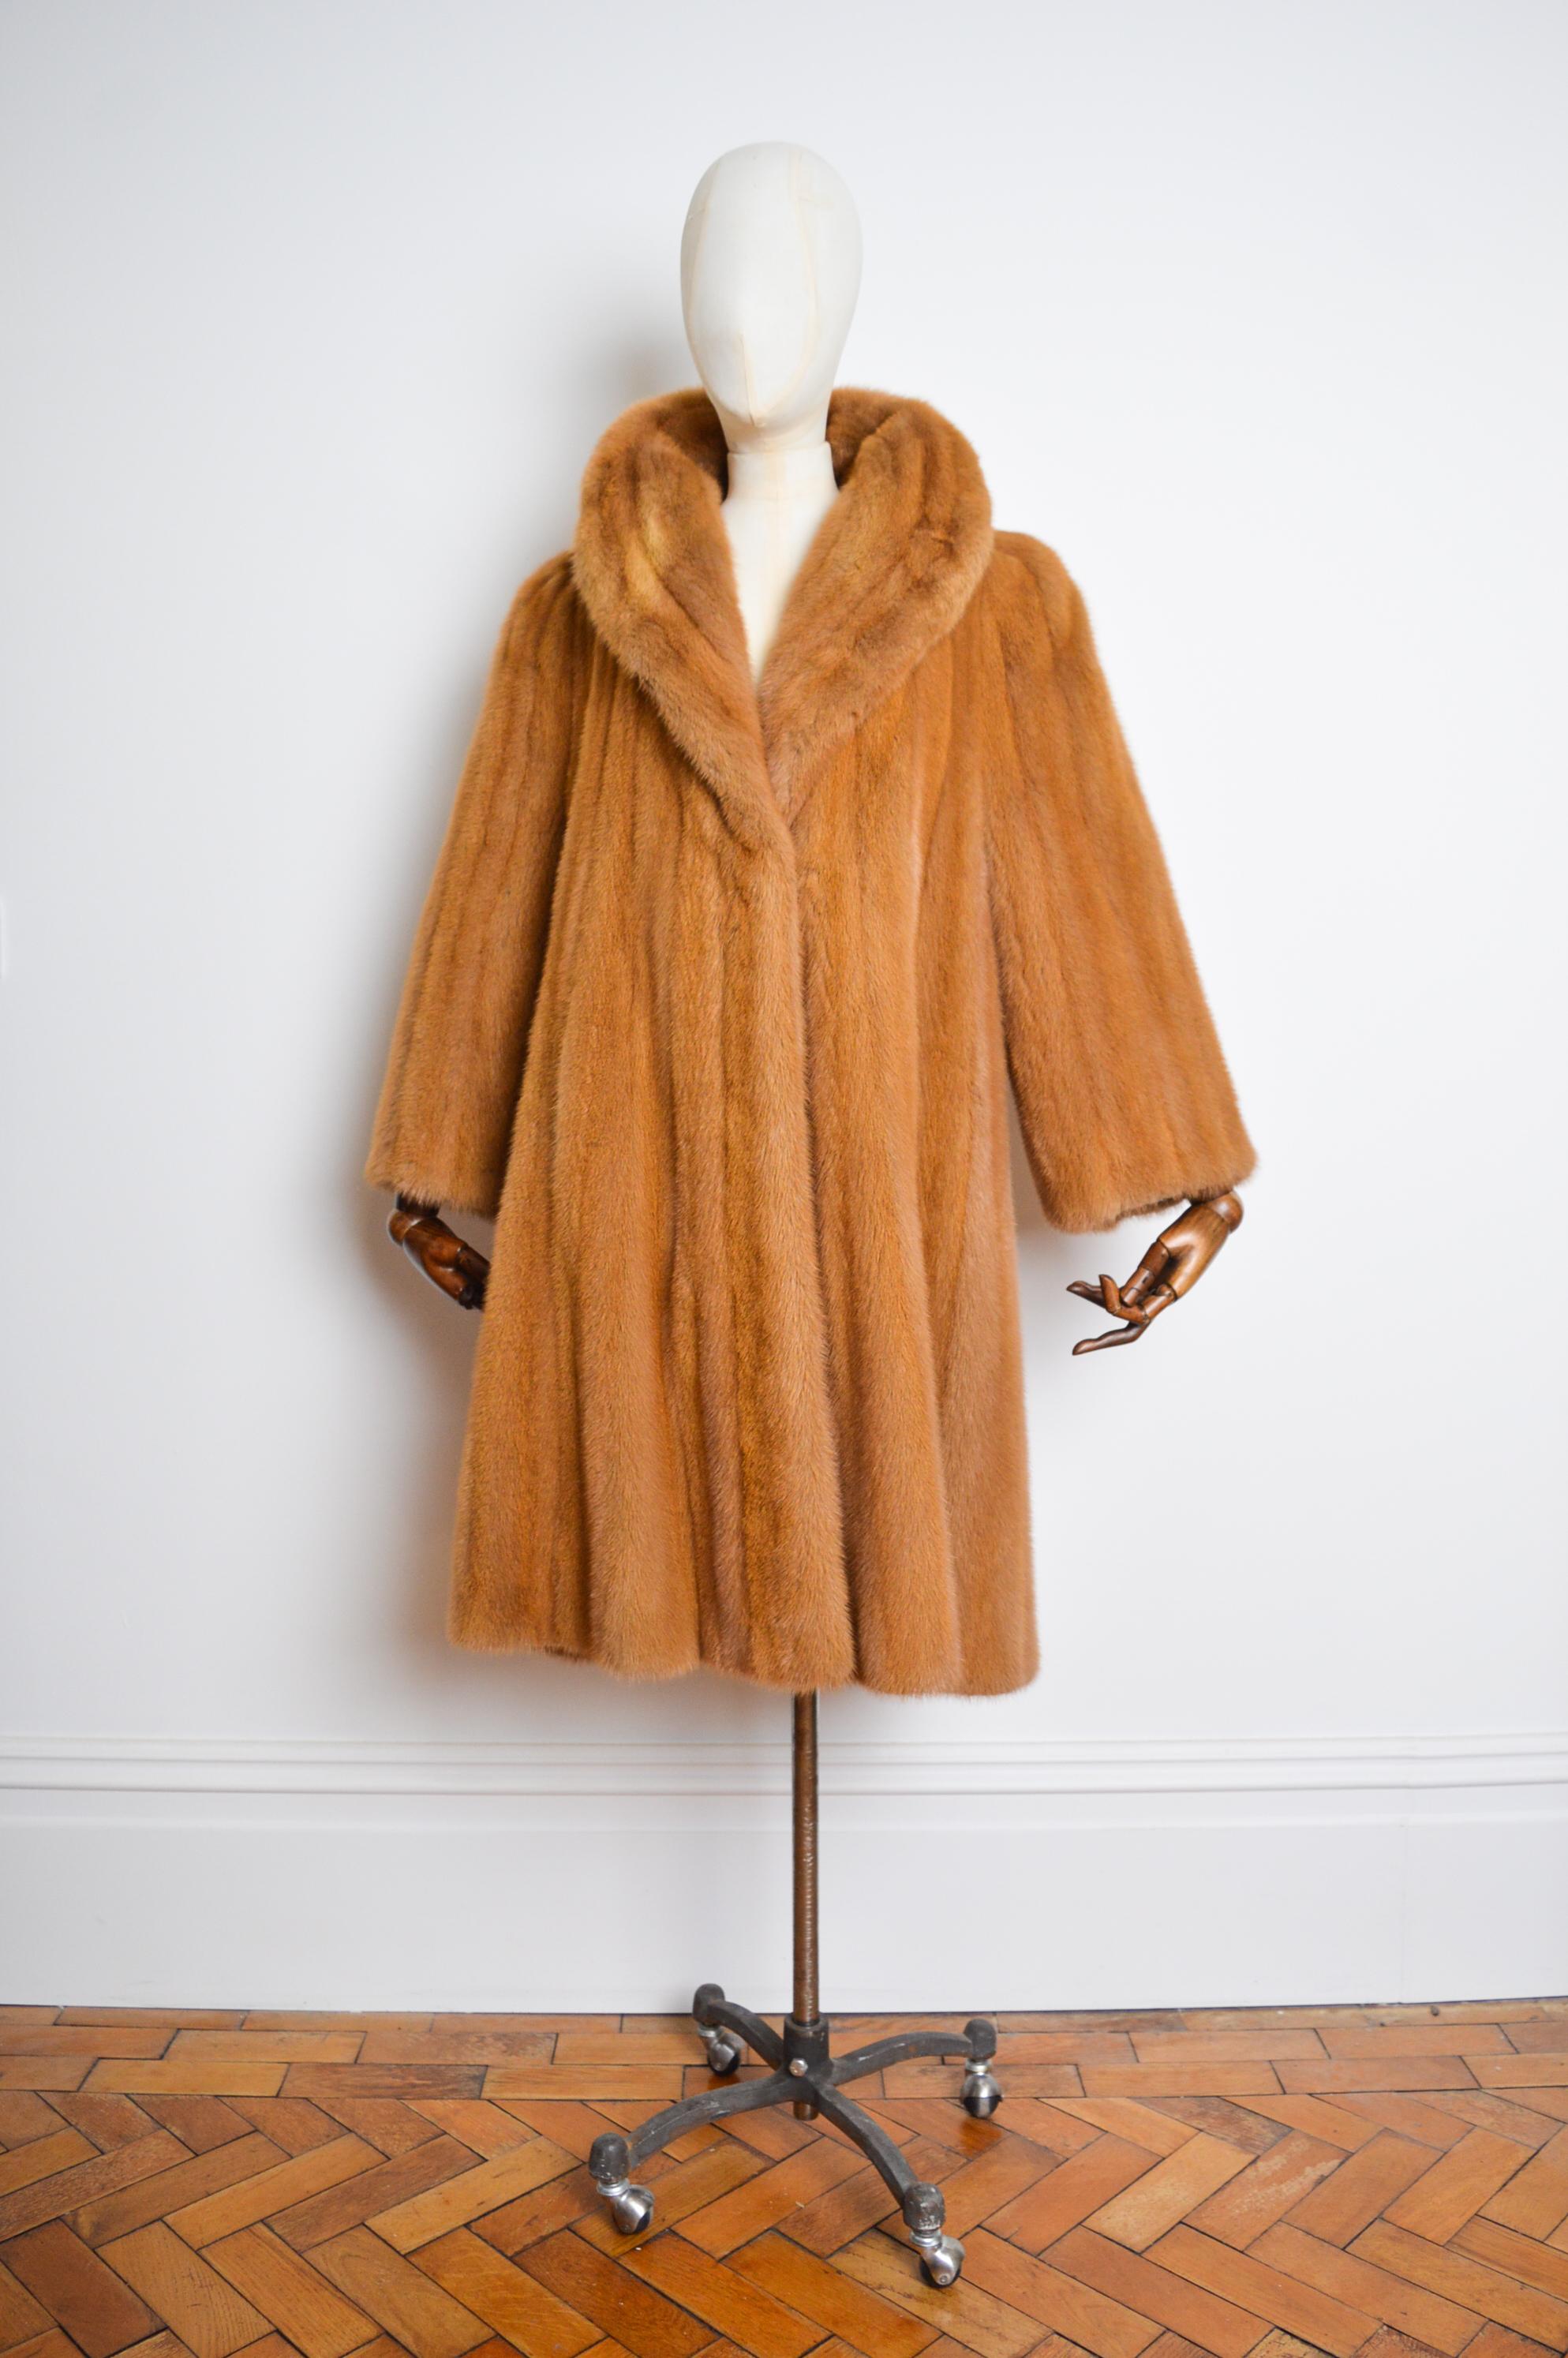 This exceptional Vintage Fur Jacket comes in a Highly Unusual 'Ginger' coloured shade and features extremely Plush, thick Pelts of soft Natural Mink, Paisley Lined interior, central farrier hook fasten closure and a loose, slouchy fit that can be